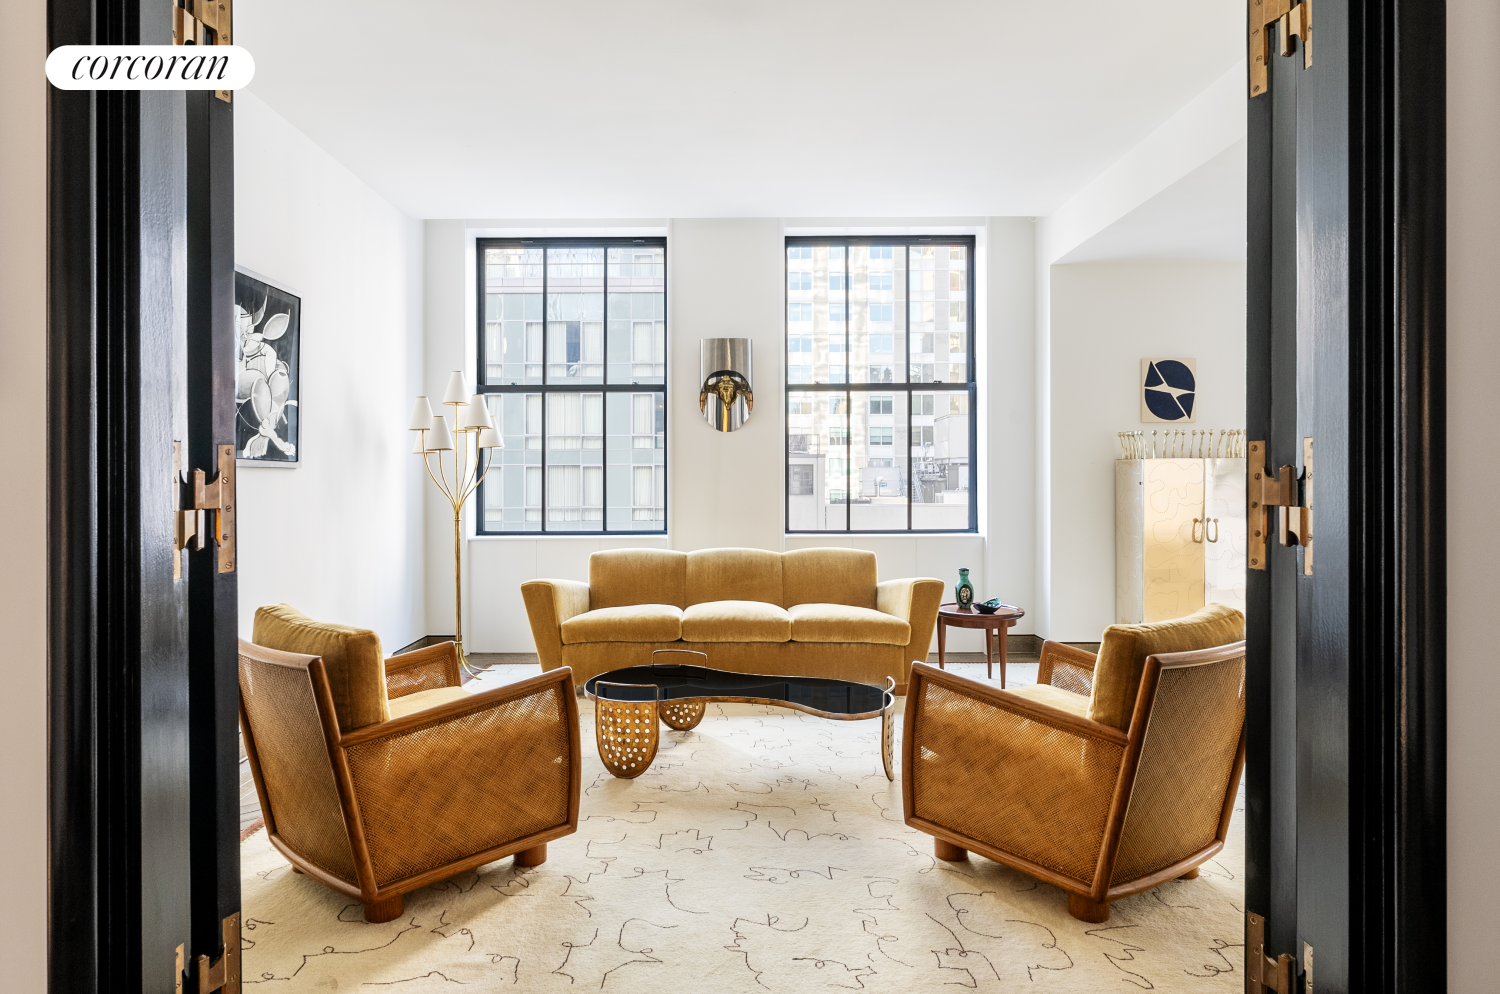 111 West 57th Street 11A, Central Park South, Midtown West, NYC - 3 Bedrooms  4.5 Bathrooms  7 Rooms - 